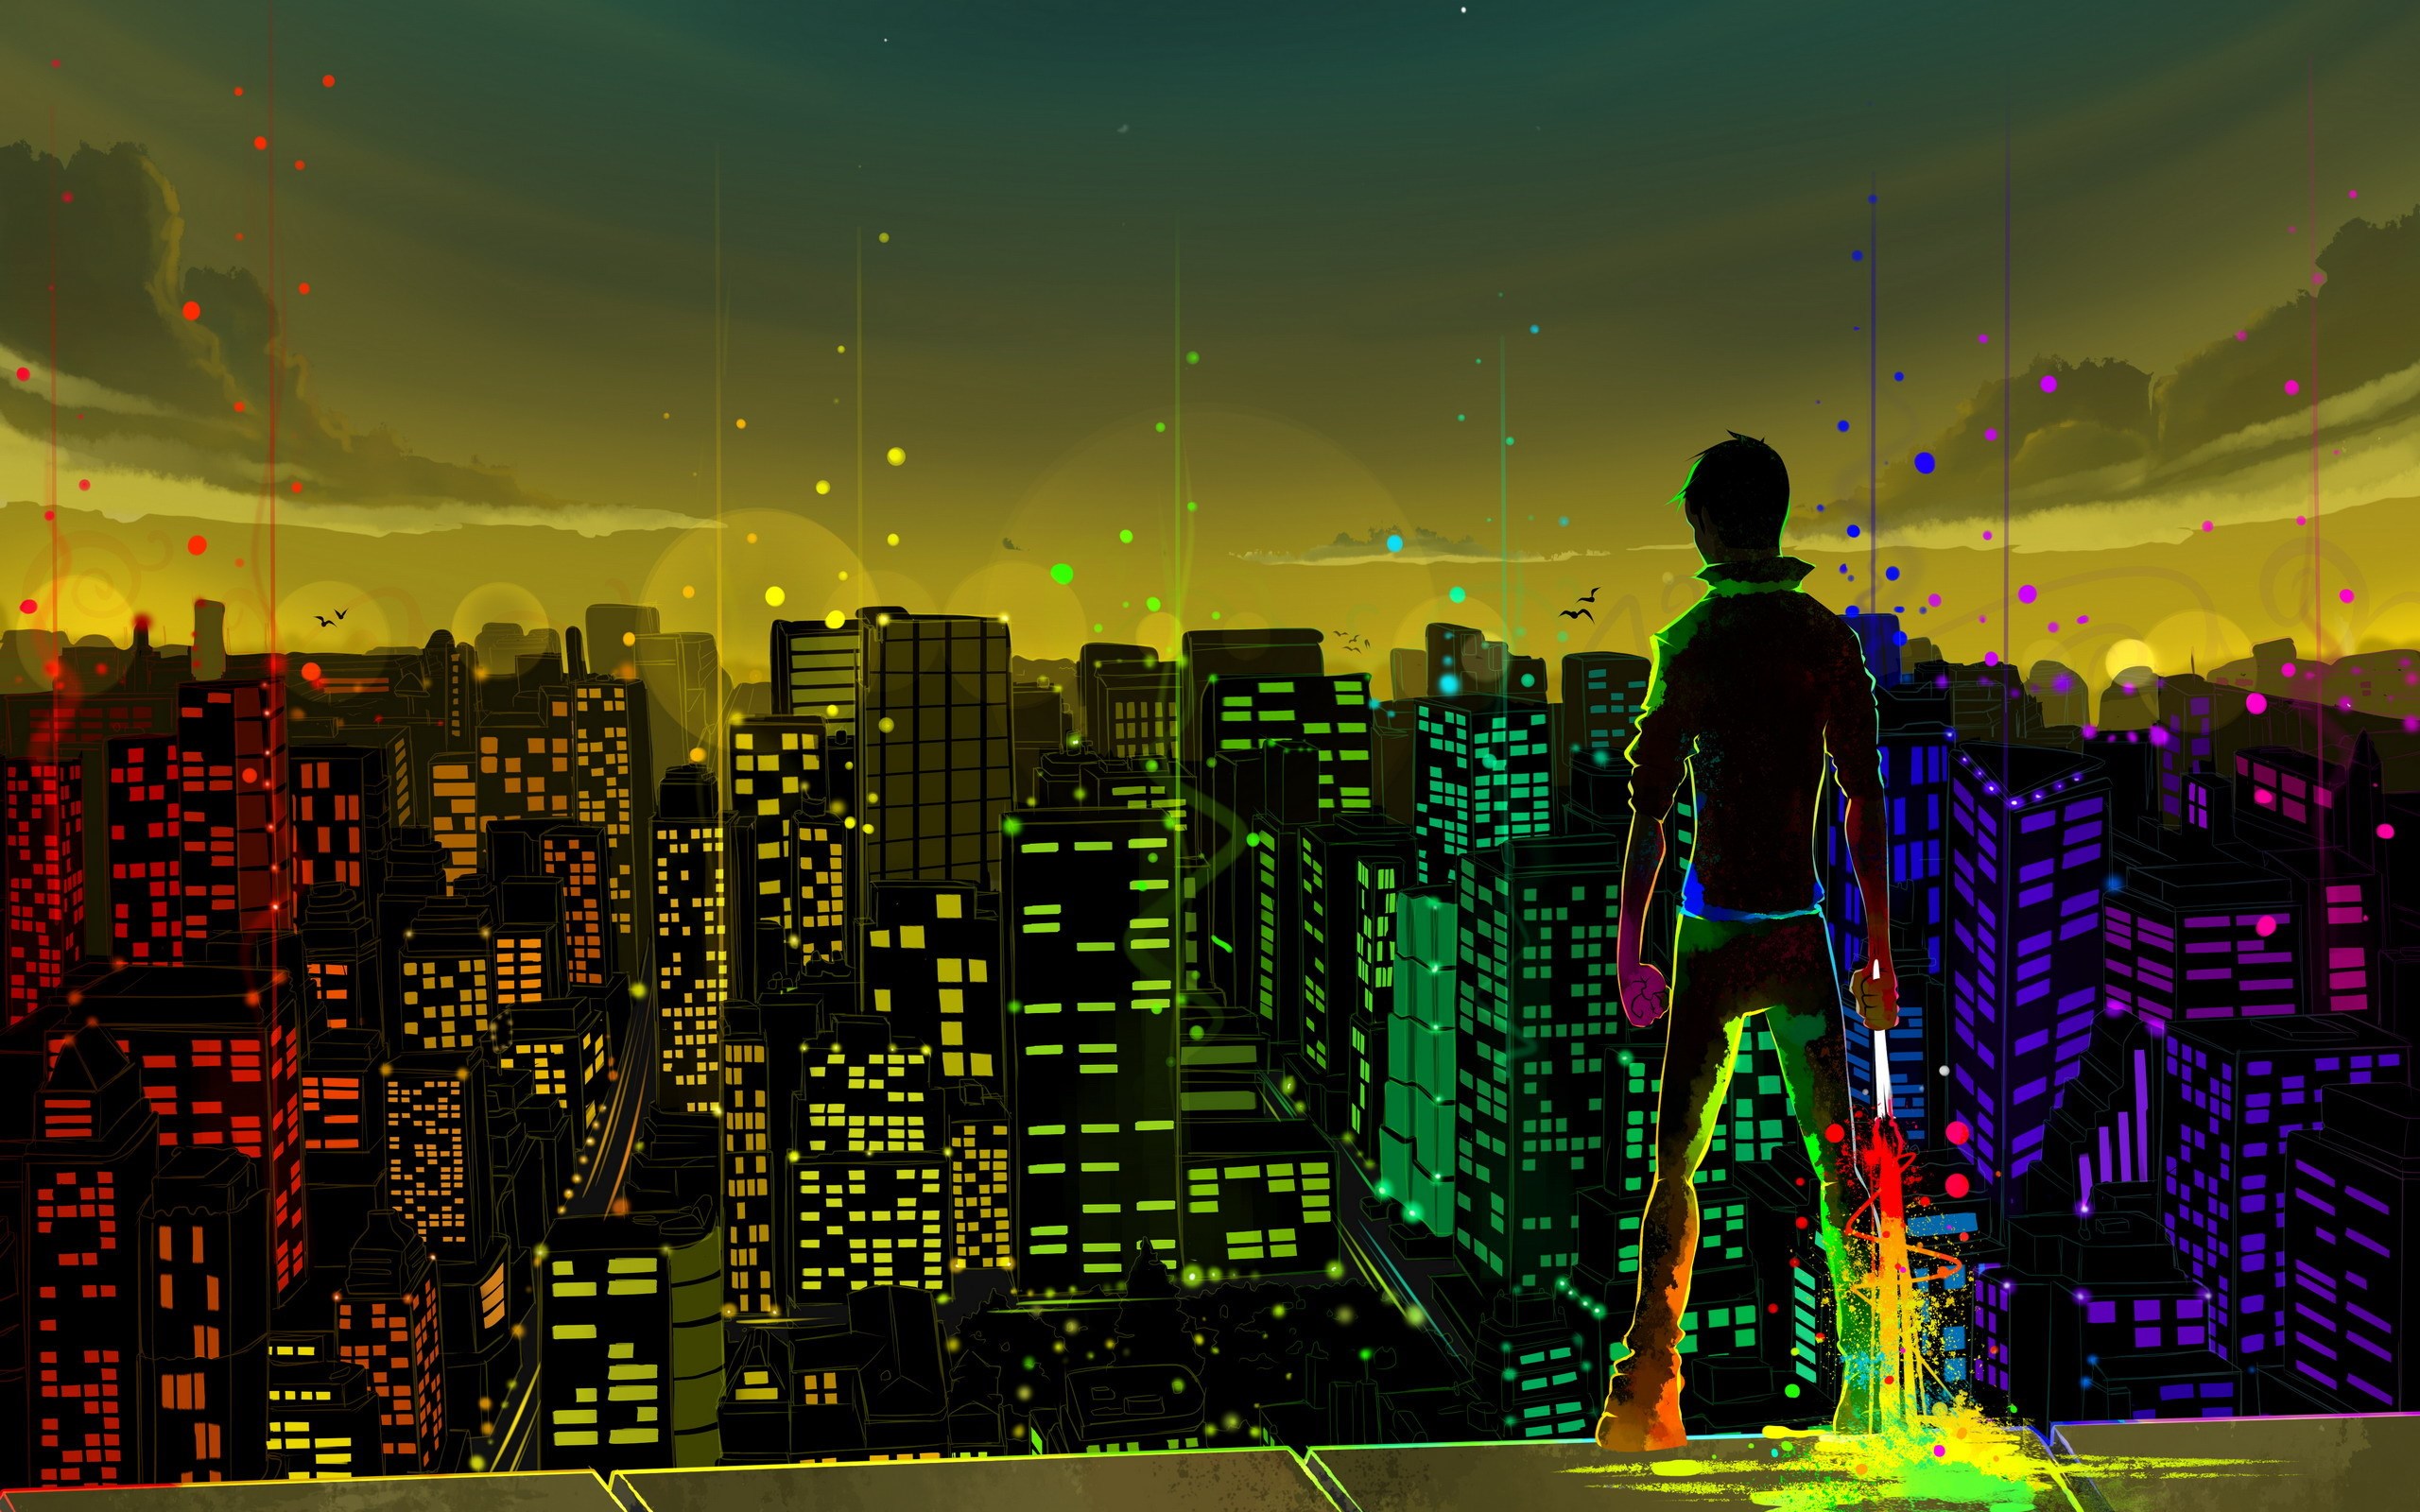 A person standing on a rooftop looking out at a city at night - 2560x1600